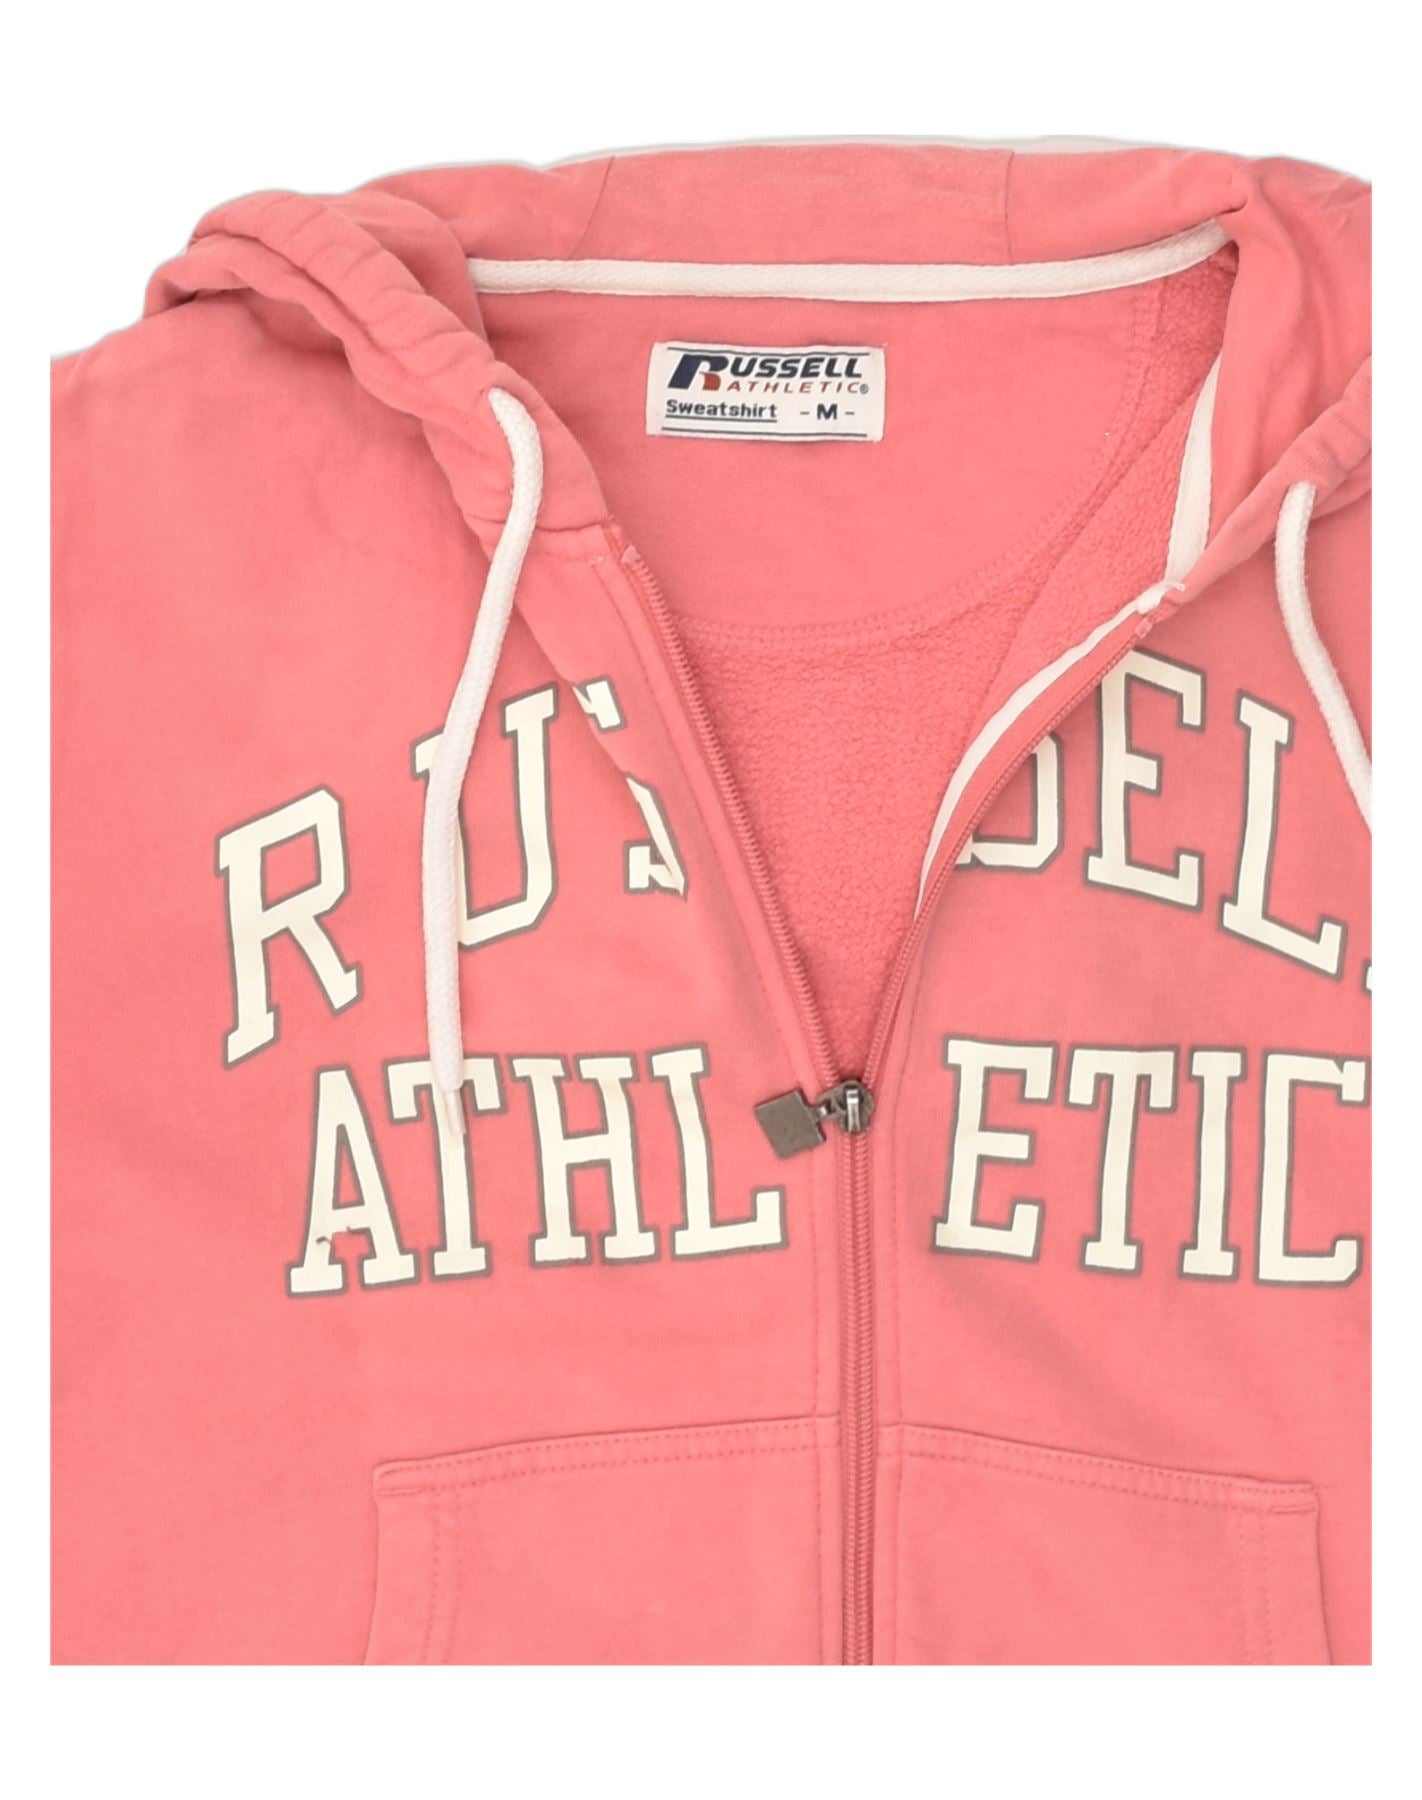 RUSSELL ATHLETIC Womens Graphic Zip Hoodie Sweater UK 14 Medium Pink, Vintage & Second-Hand Clothing Online